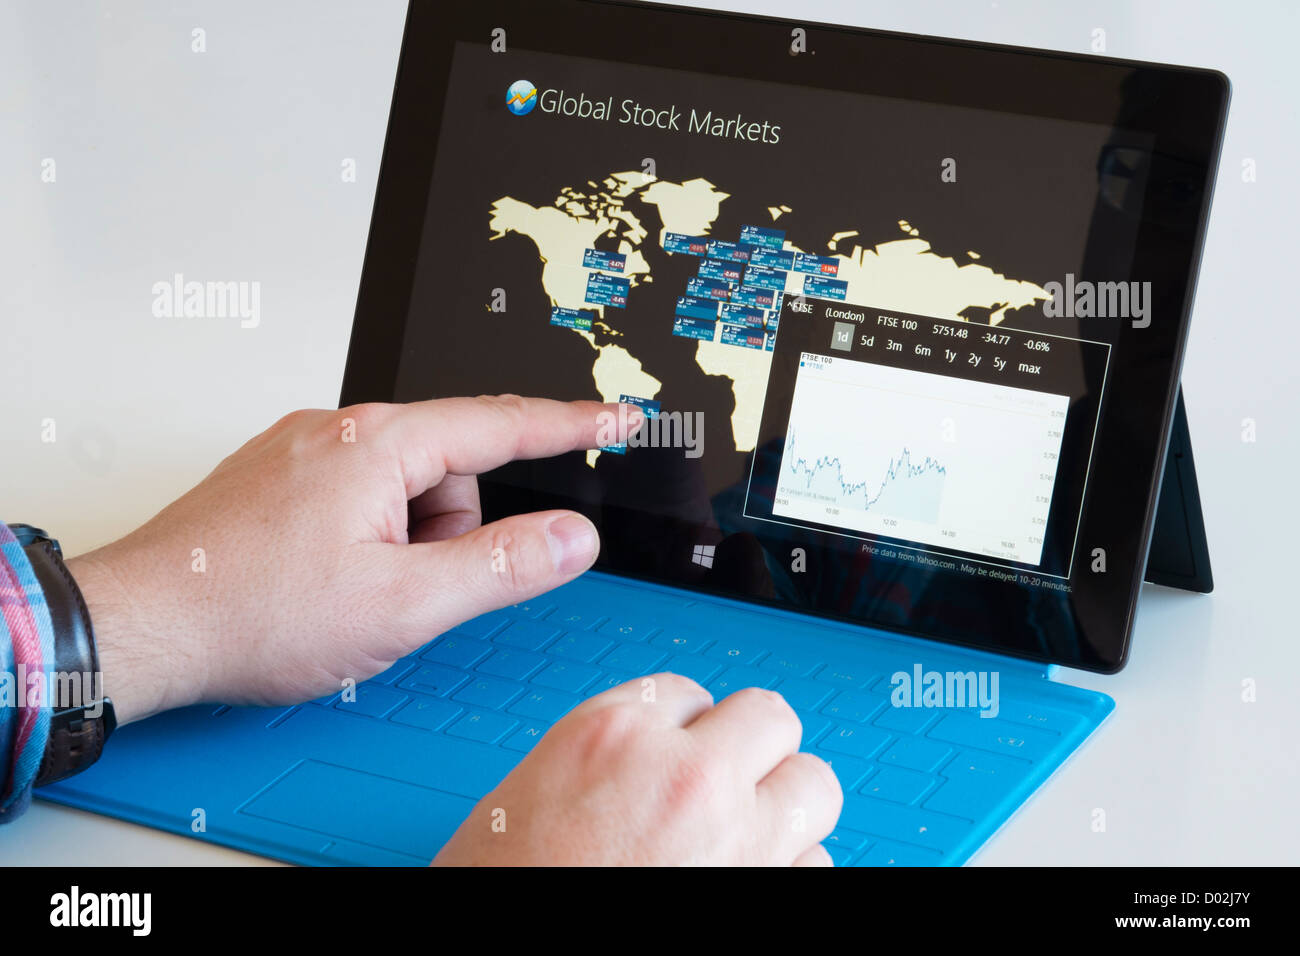 Man checking financial performance of stock markets on Microsoft Surface rt tablet computer Stock Photo